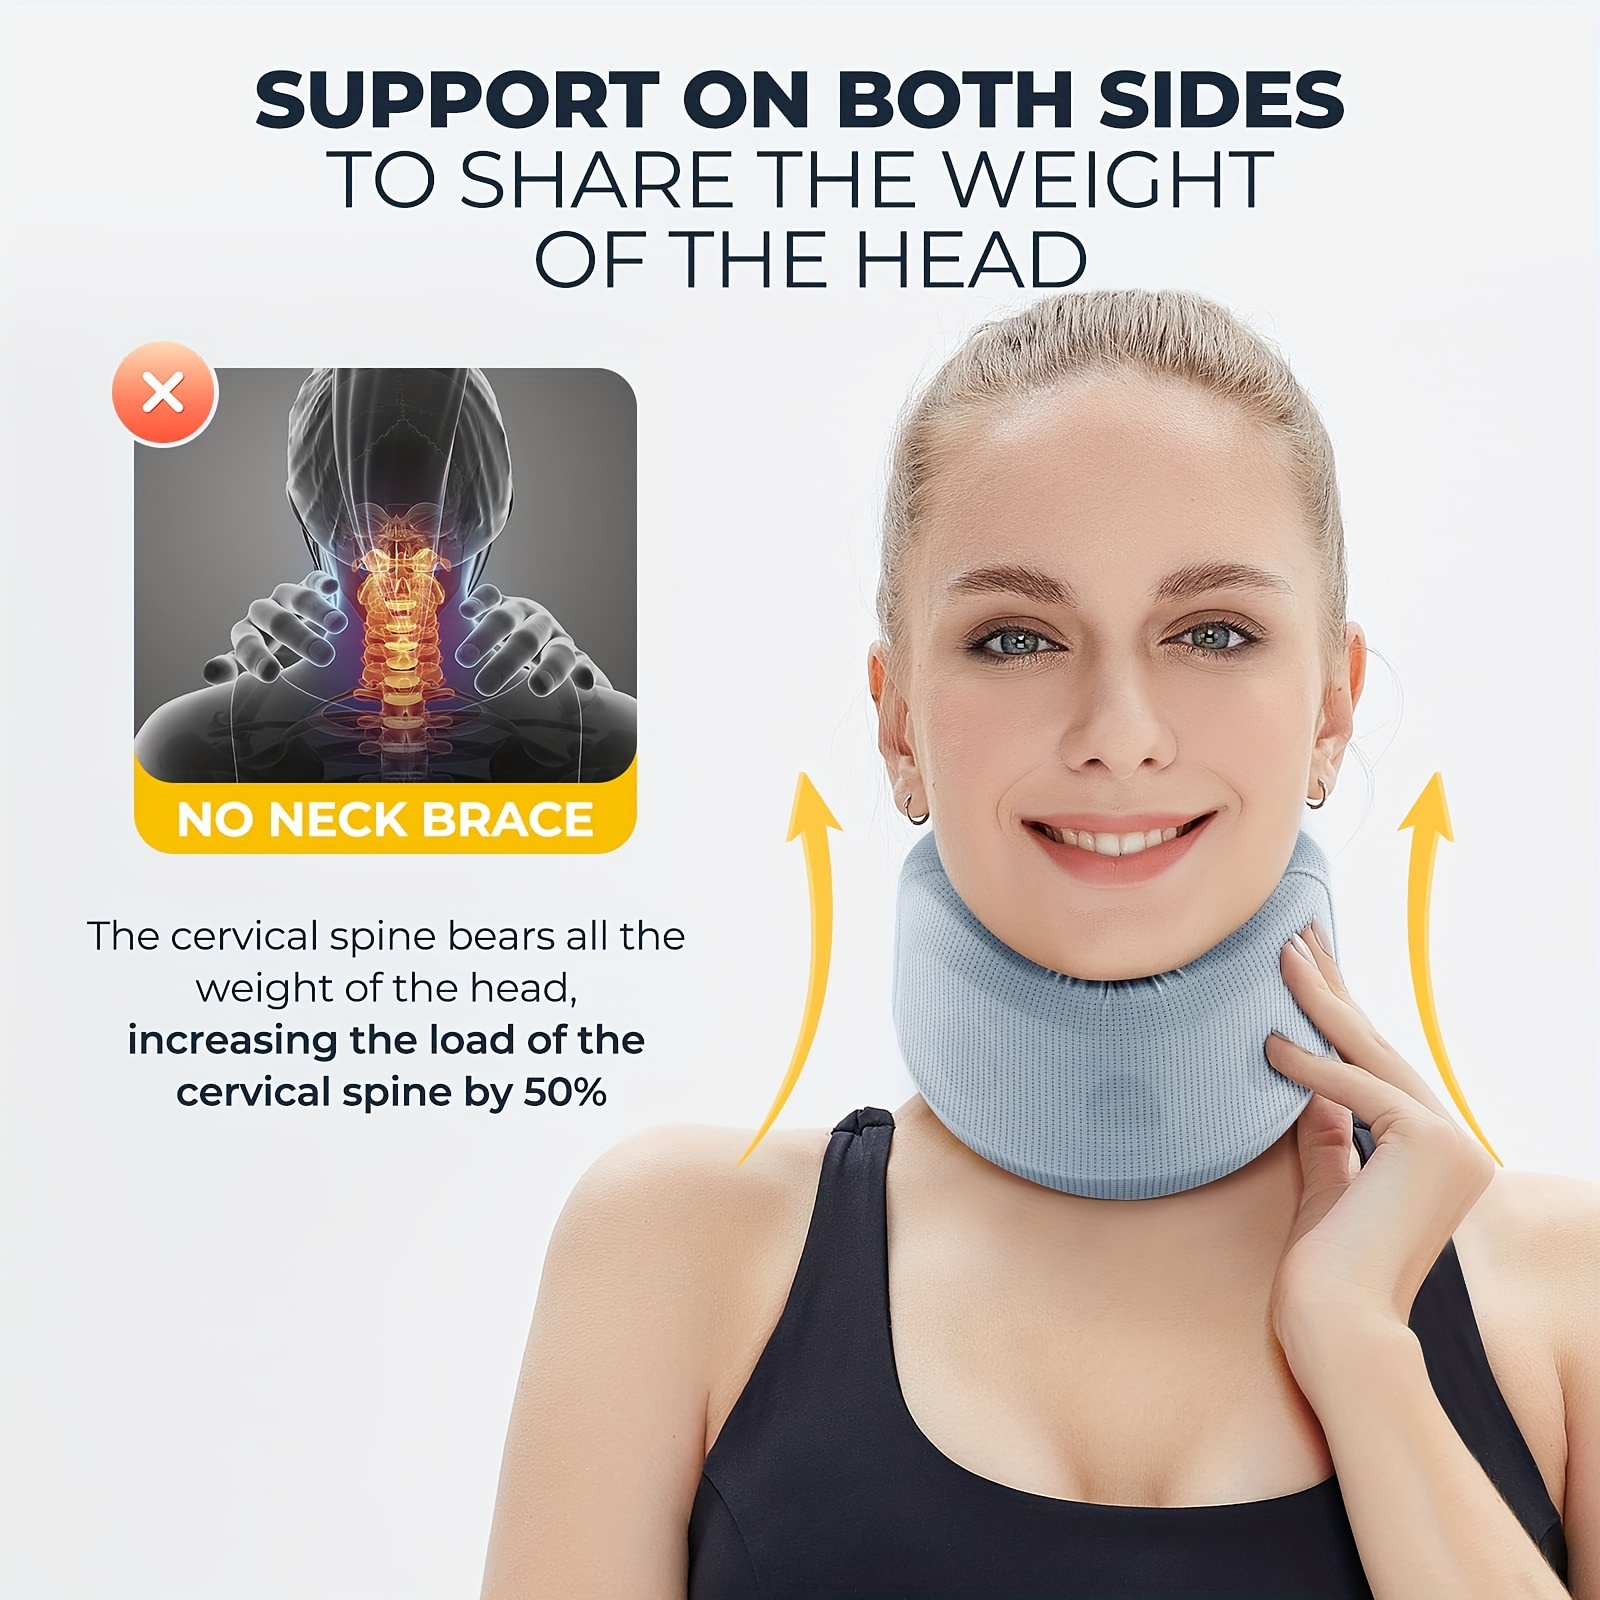  Soft Foam Neck Brace Universal Cervical Collar, Neck Brace for  Neck Pain and Support for Women, Men, Adjustable Neck Support Brace for  Sleeping, Pain Relief, Neck Brace for Posture : Health